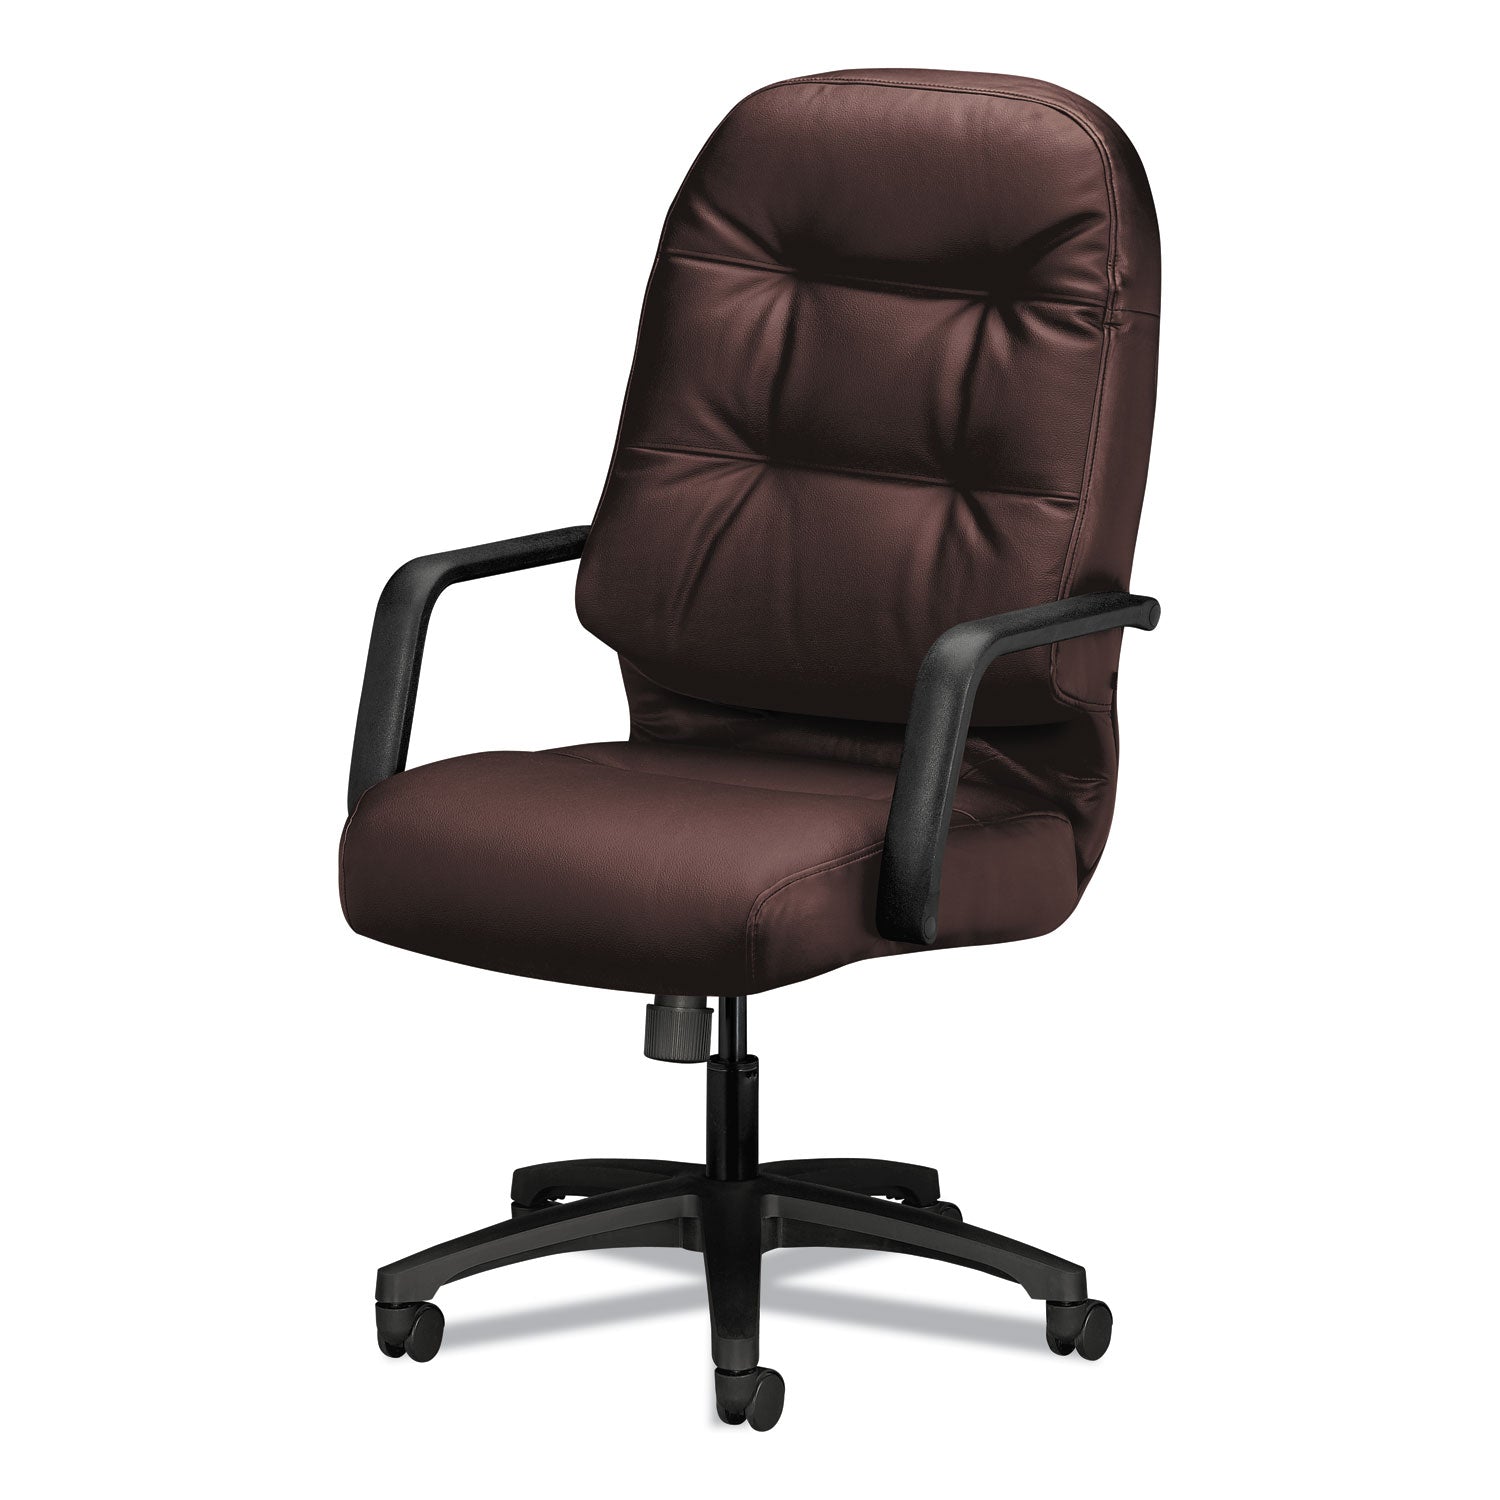 Pillow-Soft 2090 Series Executive High-Back Swivel/Tilt Chair, Supports 300 lb, 16.75" to 21.25" Seat, Burgundy, Black Base - 